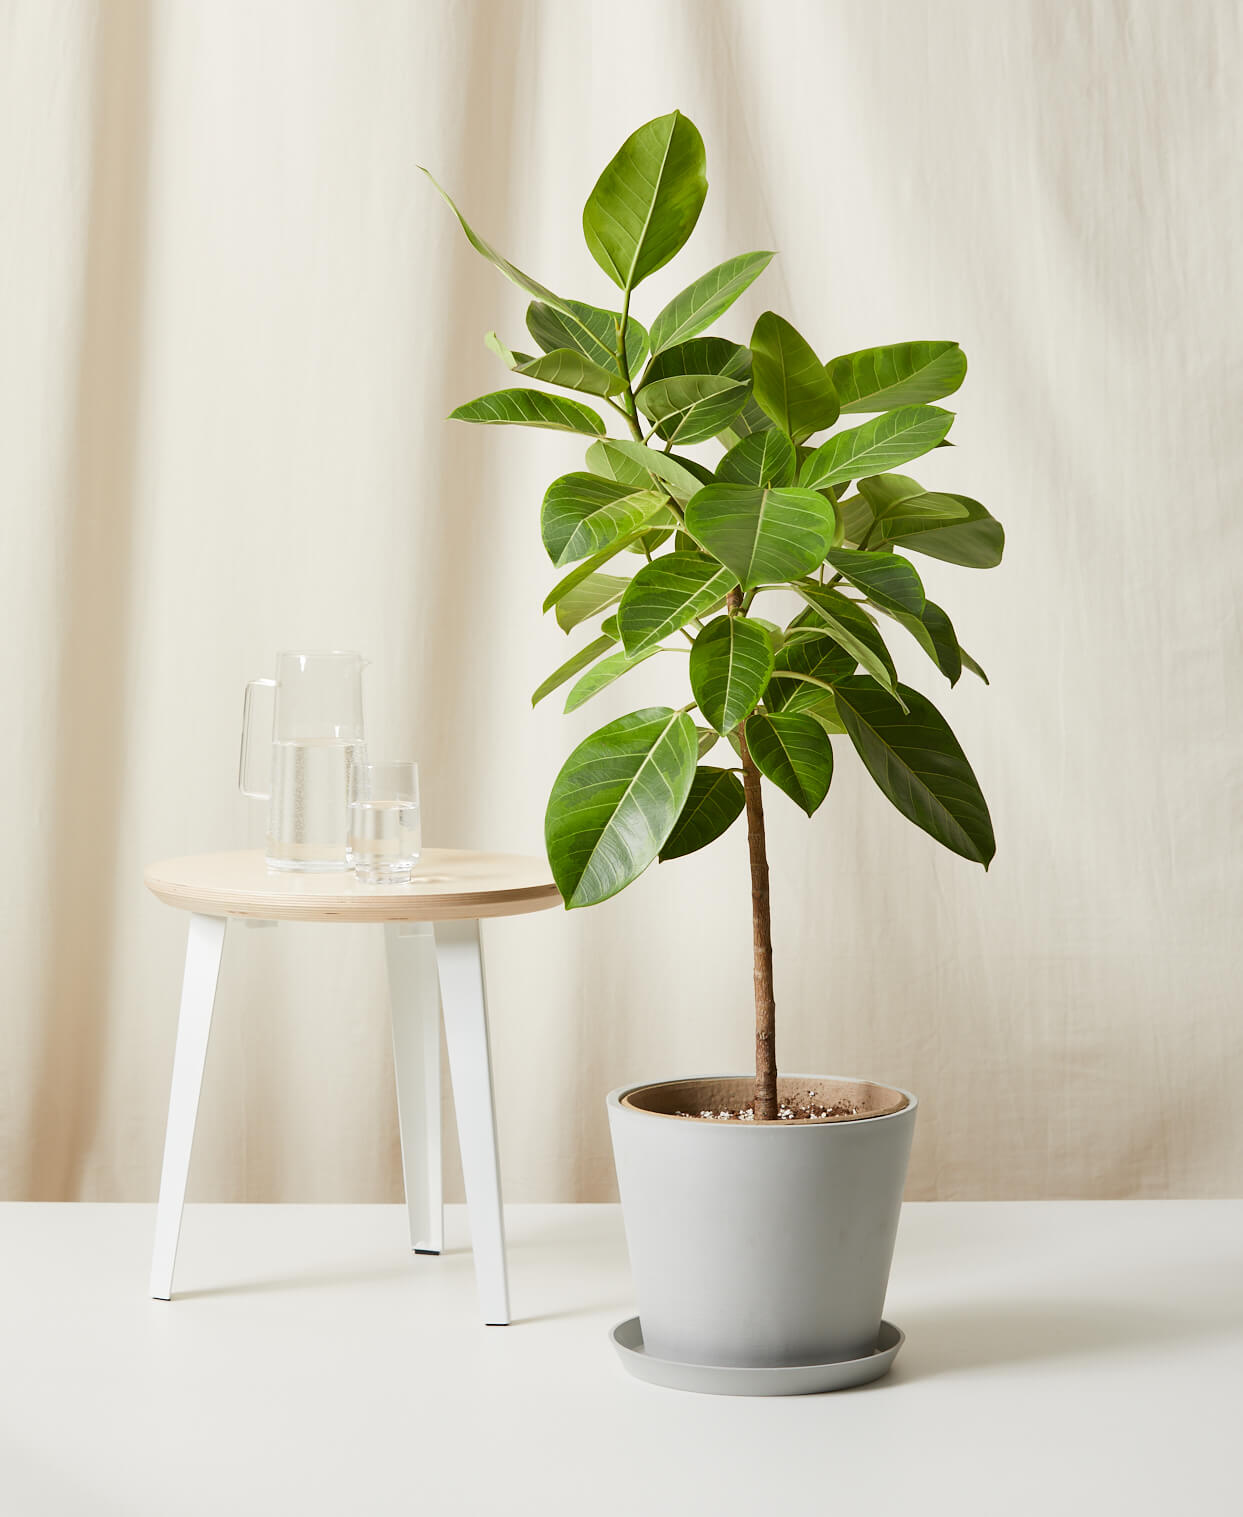 ficus 101: how to care for ficuses | bloomscape